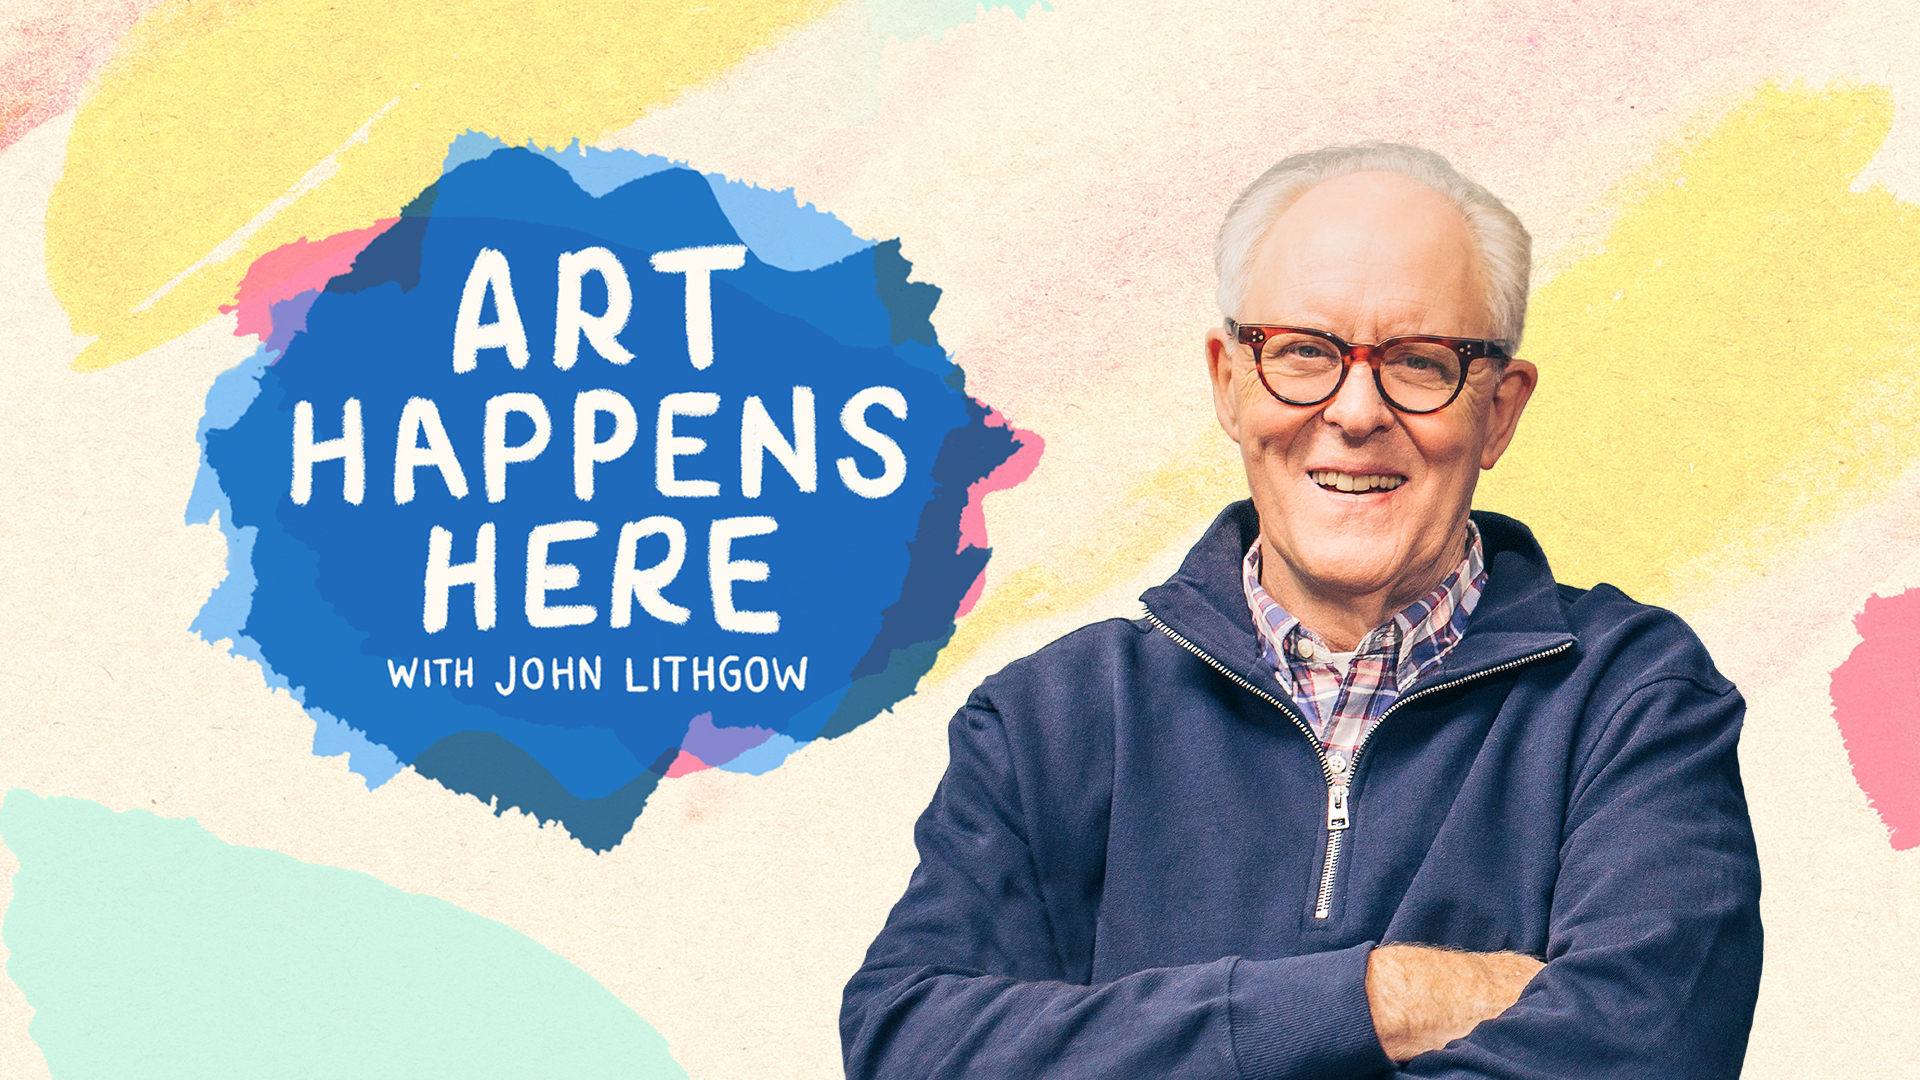 ART HAPPENS HERE WITH JOHN LITHGOW